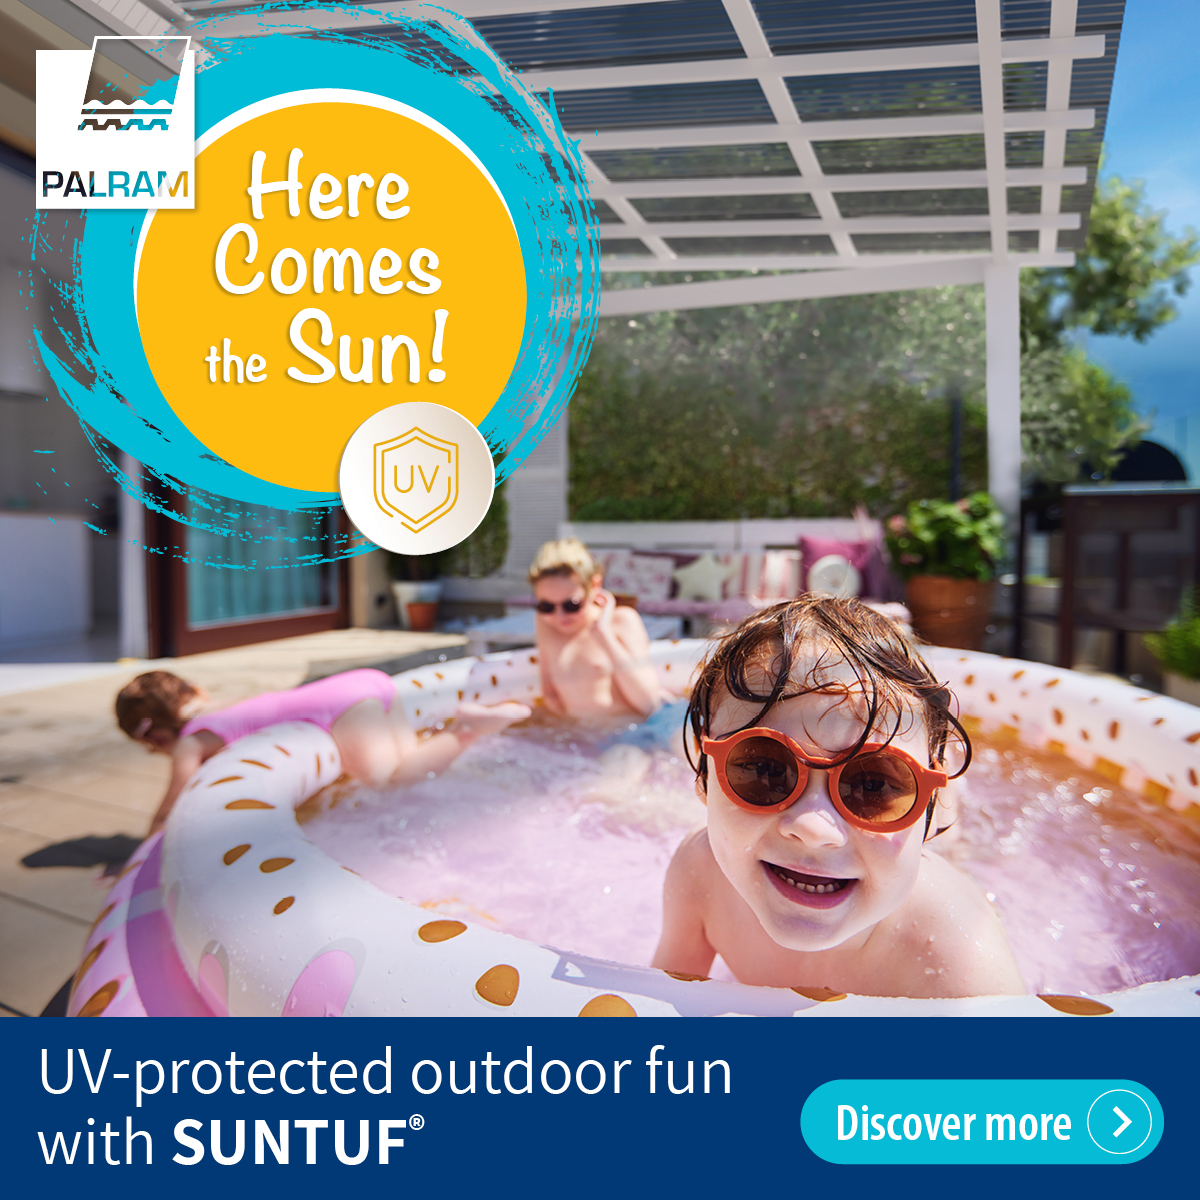 Enhance your outdoor pool experience with SUNTUF polycarbonate roofing. 
Swim in the sun while shielded from UV rays. 🏊‍♀️🌞 
#PoolTime #UVProtection